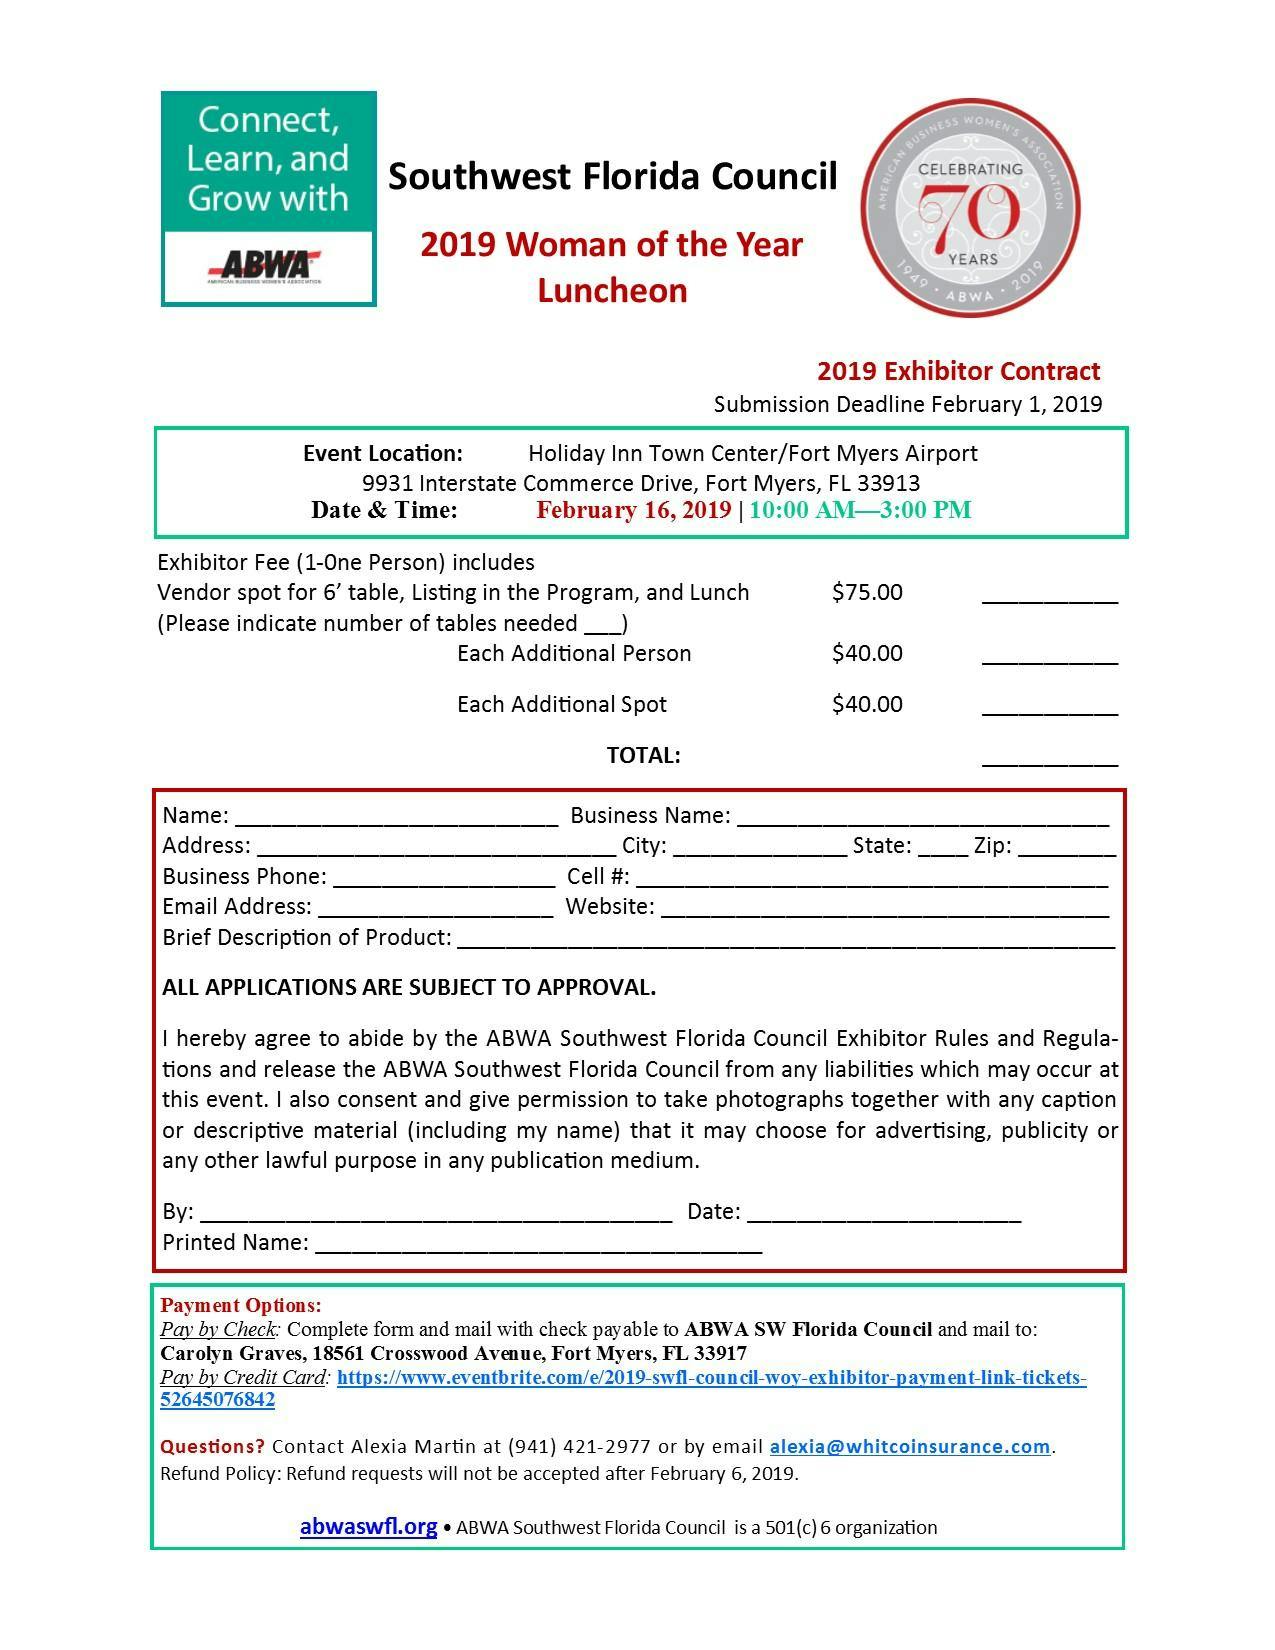 2019 SWFL Council WOY Exhibitor Additional Person or Spot Payment Link